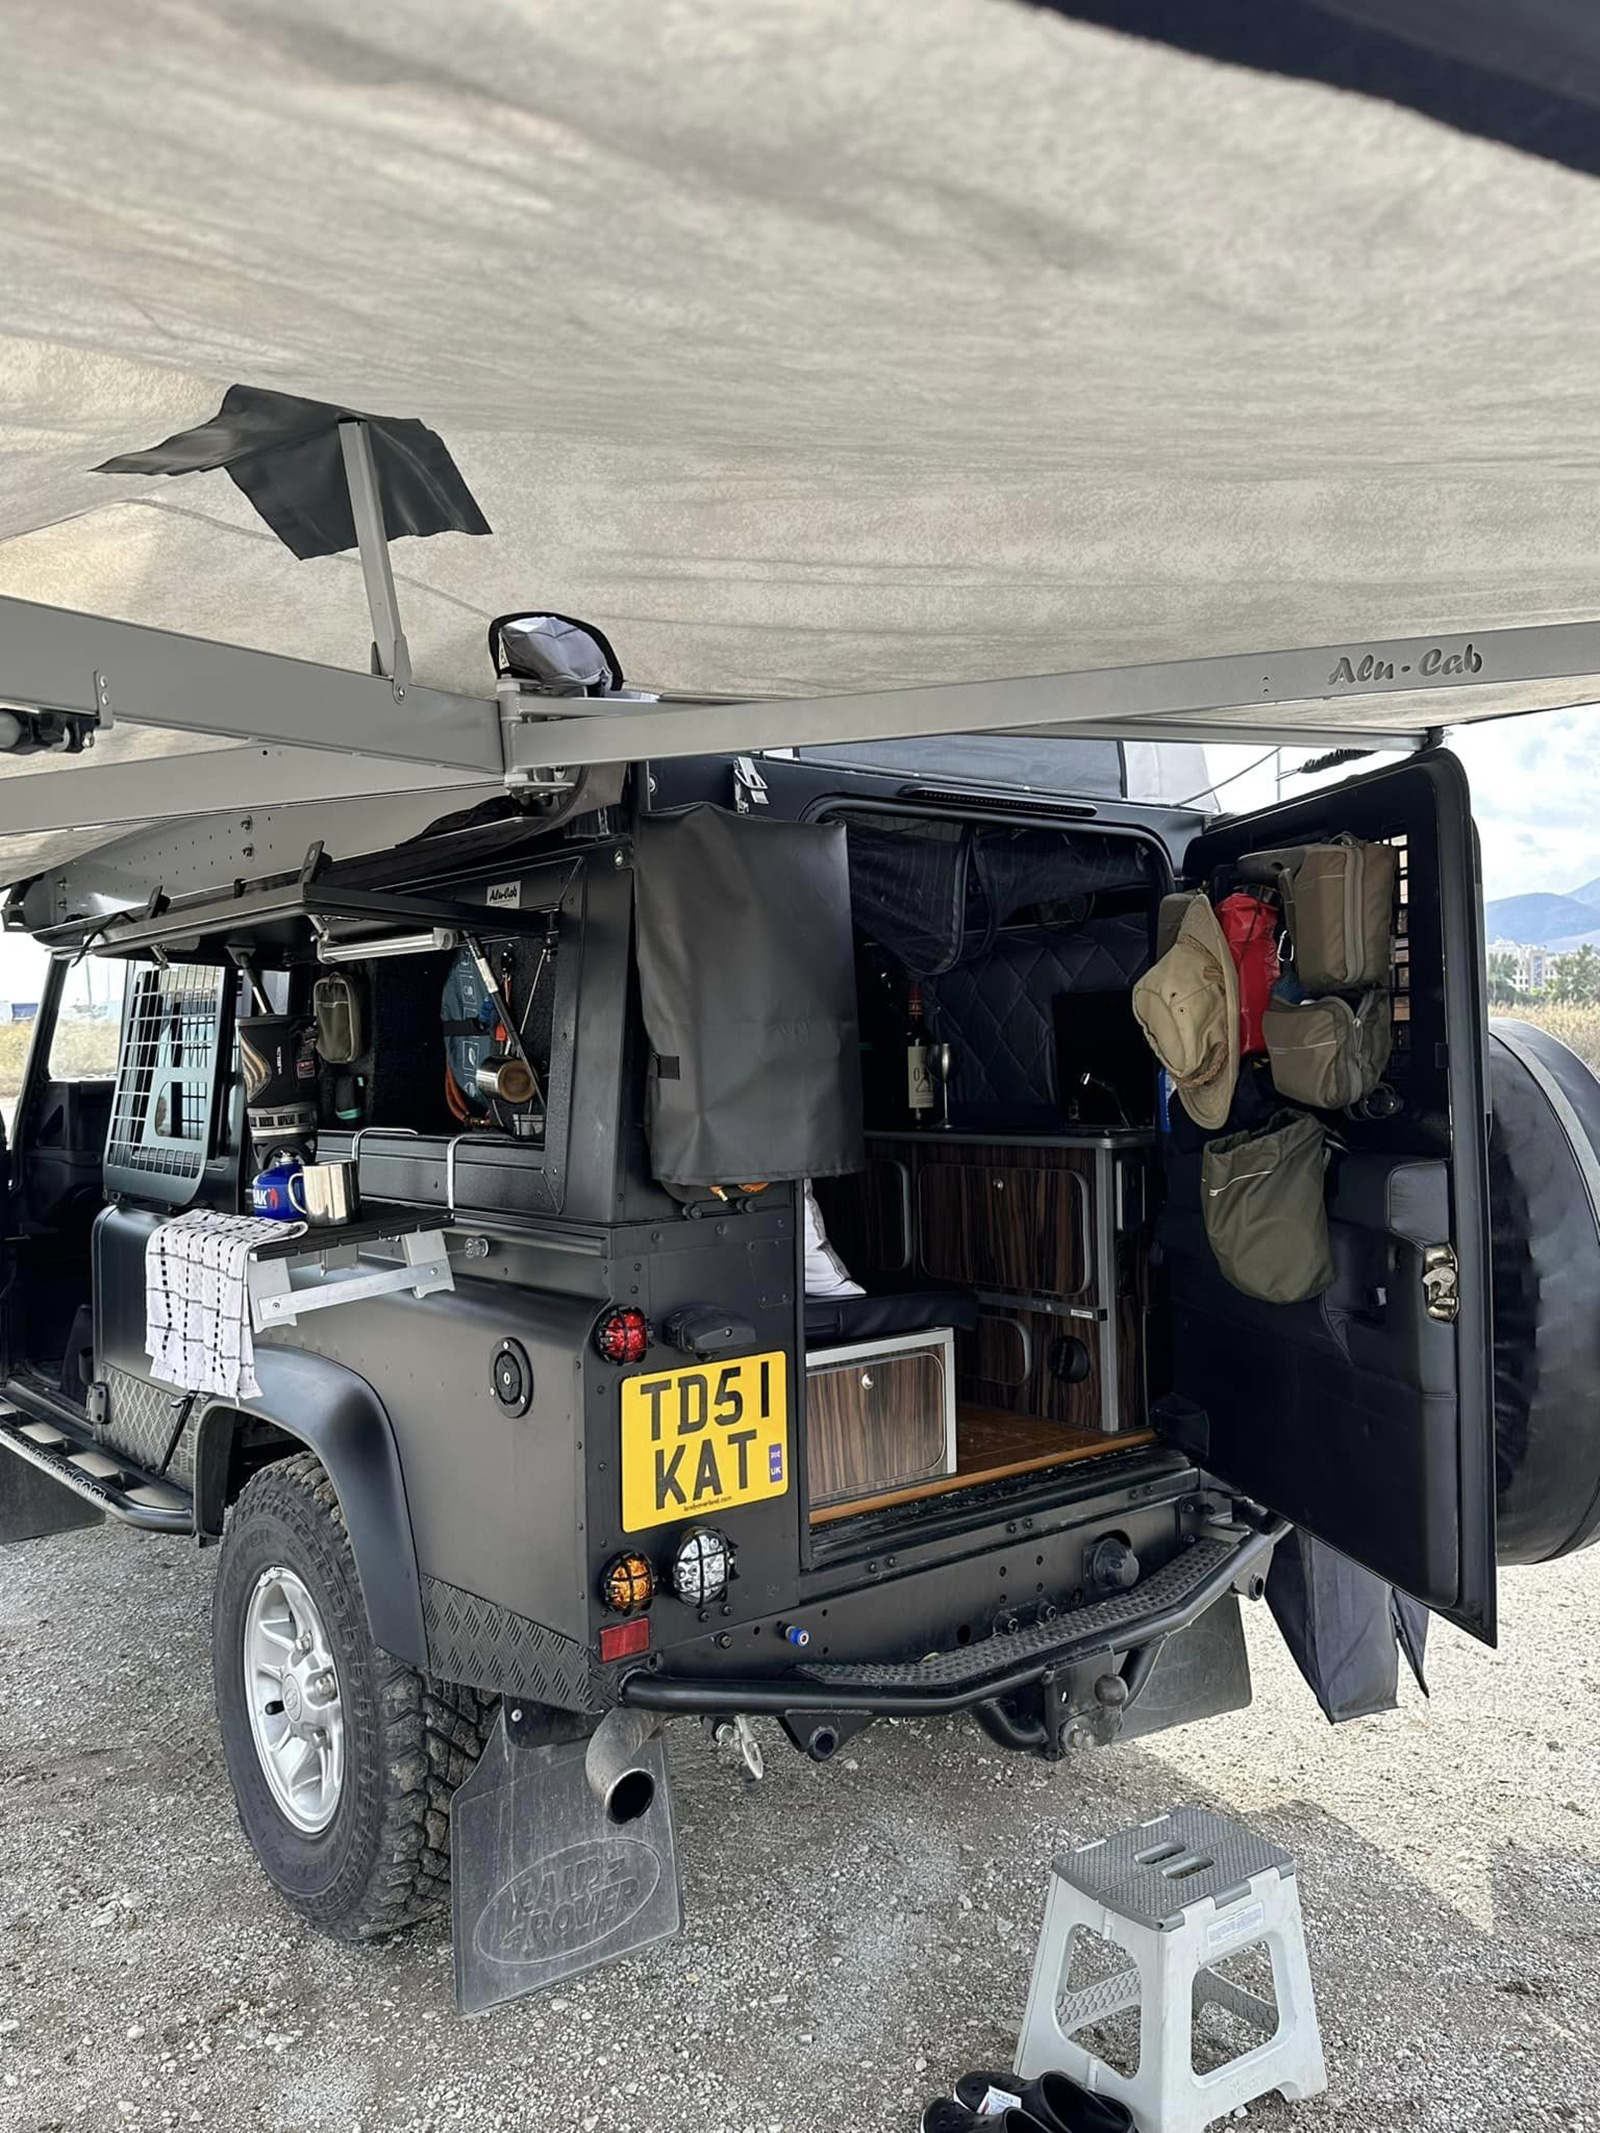 The old lady U60 turned a billion-dollar Land Rover into a mobile home traveling around Africa - Photo 8.